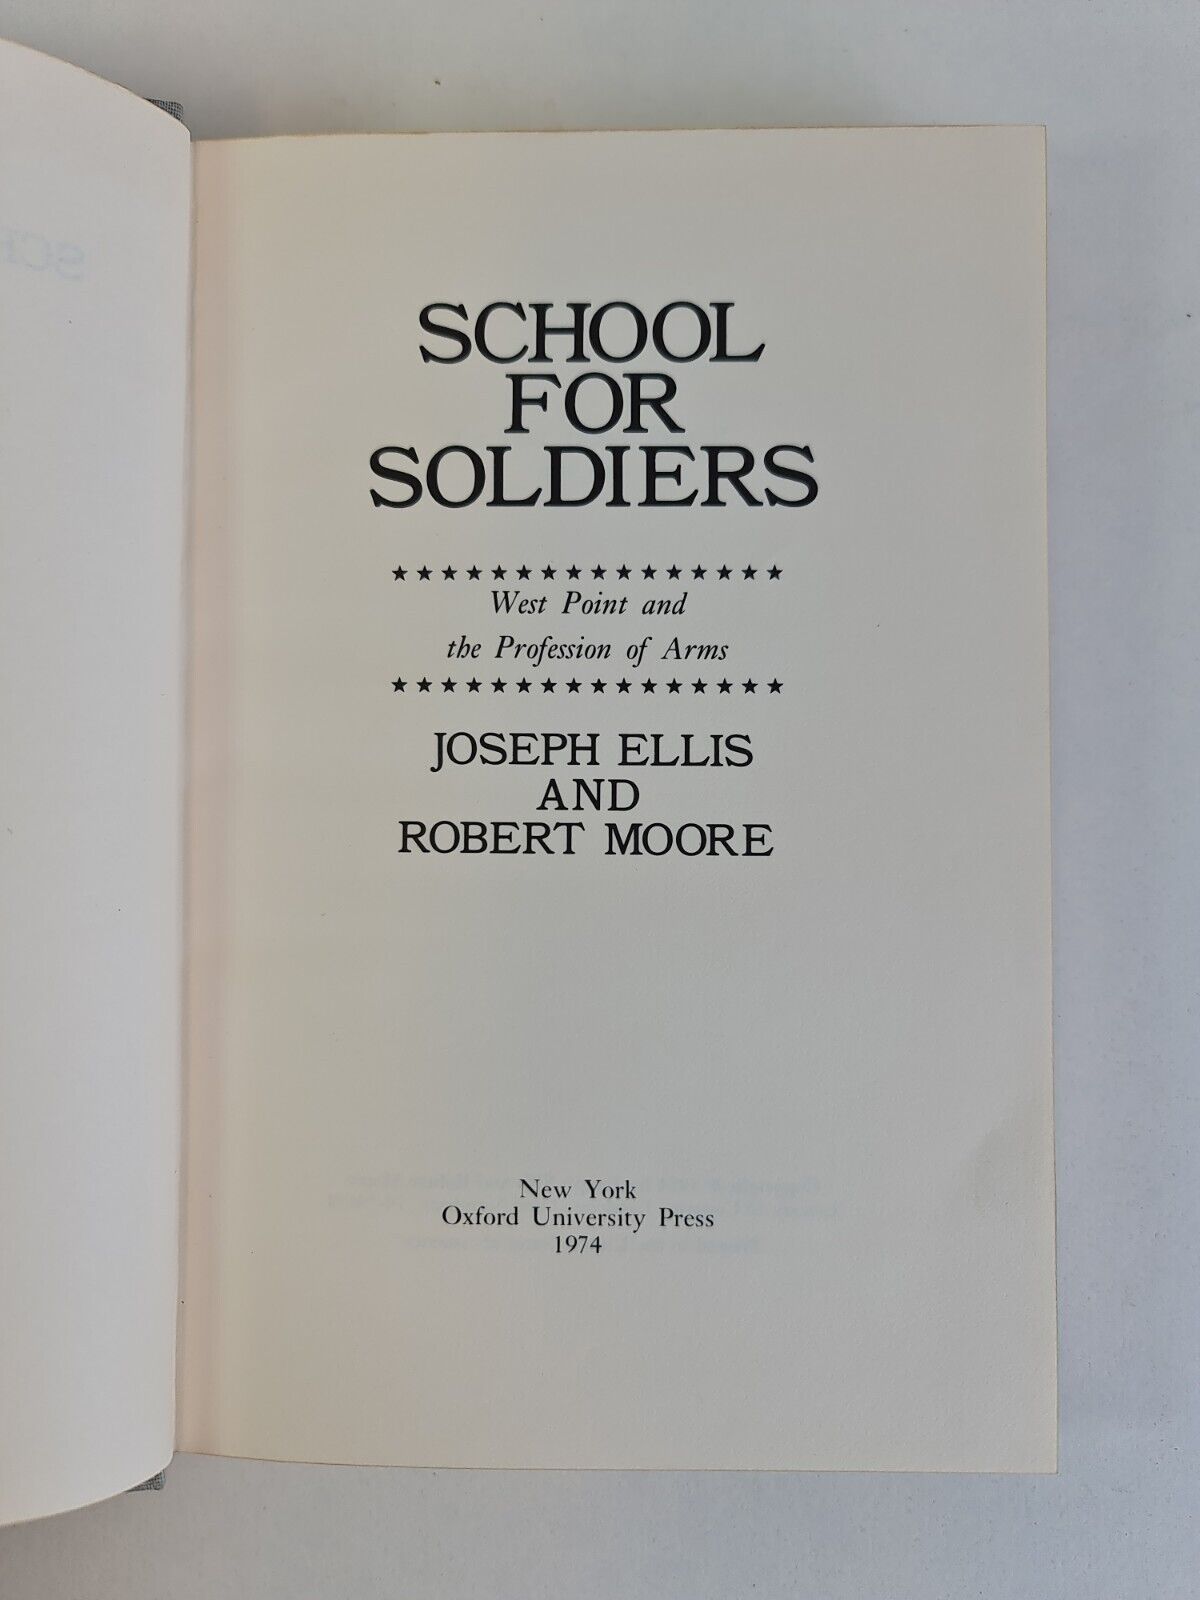 School for Soldiers: West Point & the Profession of Arms by Joseph Ellis